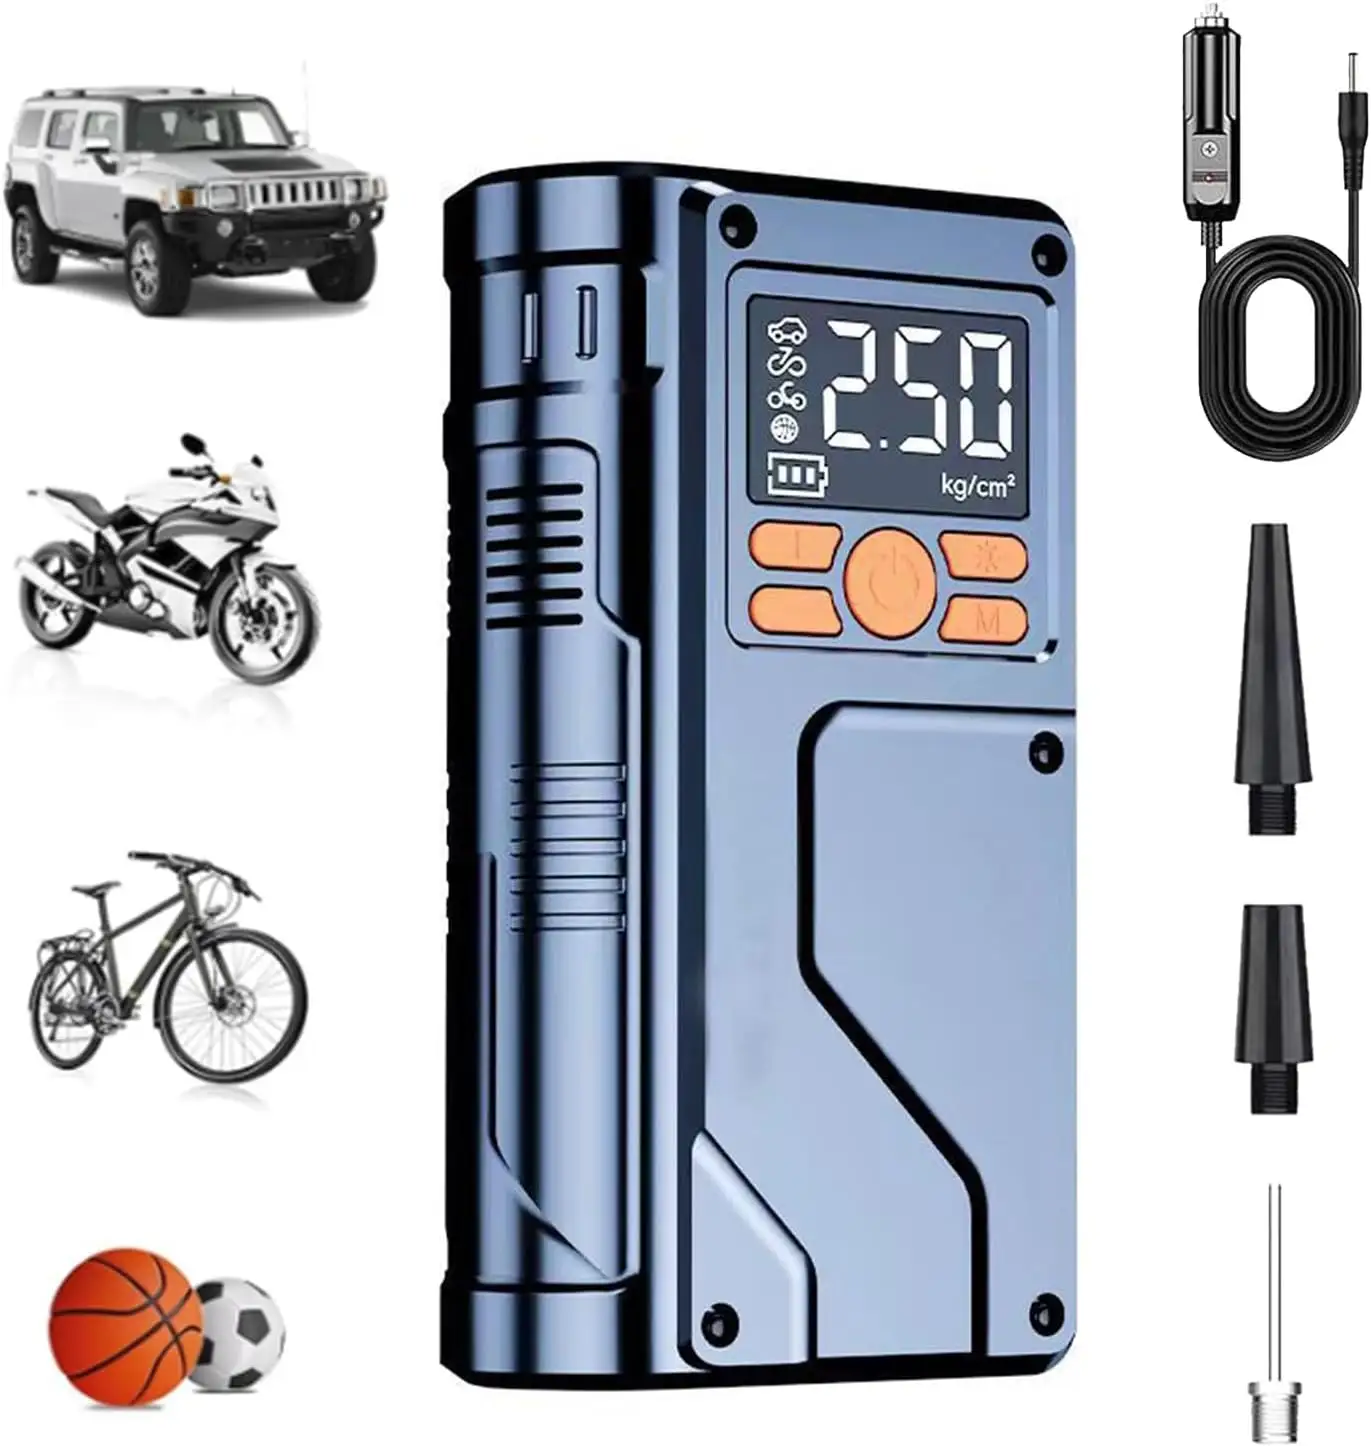 new portable multi-function best 12V car battery jump starter with air compressor pump tyre inflator power bank station pack kit